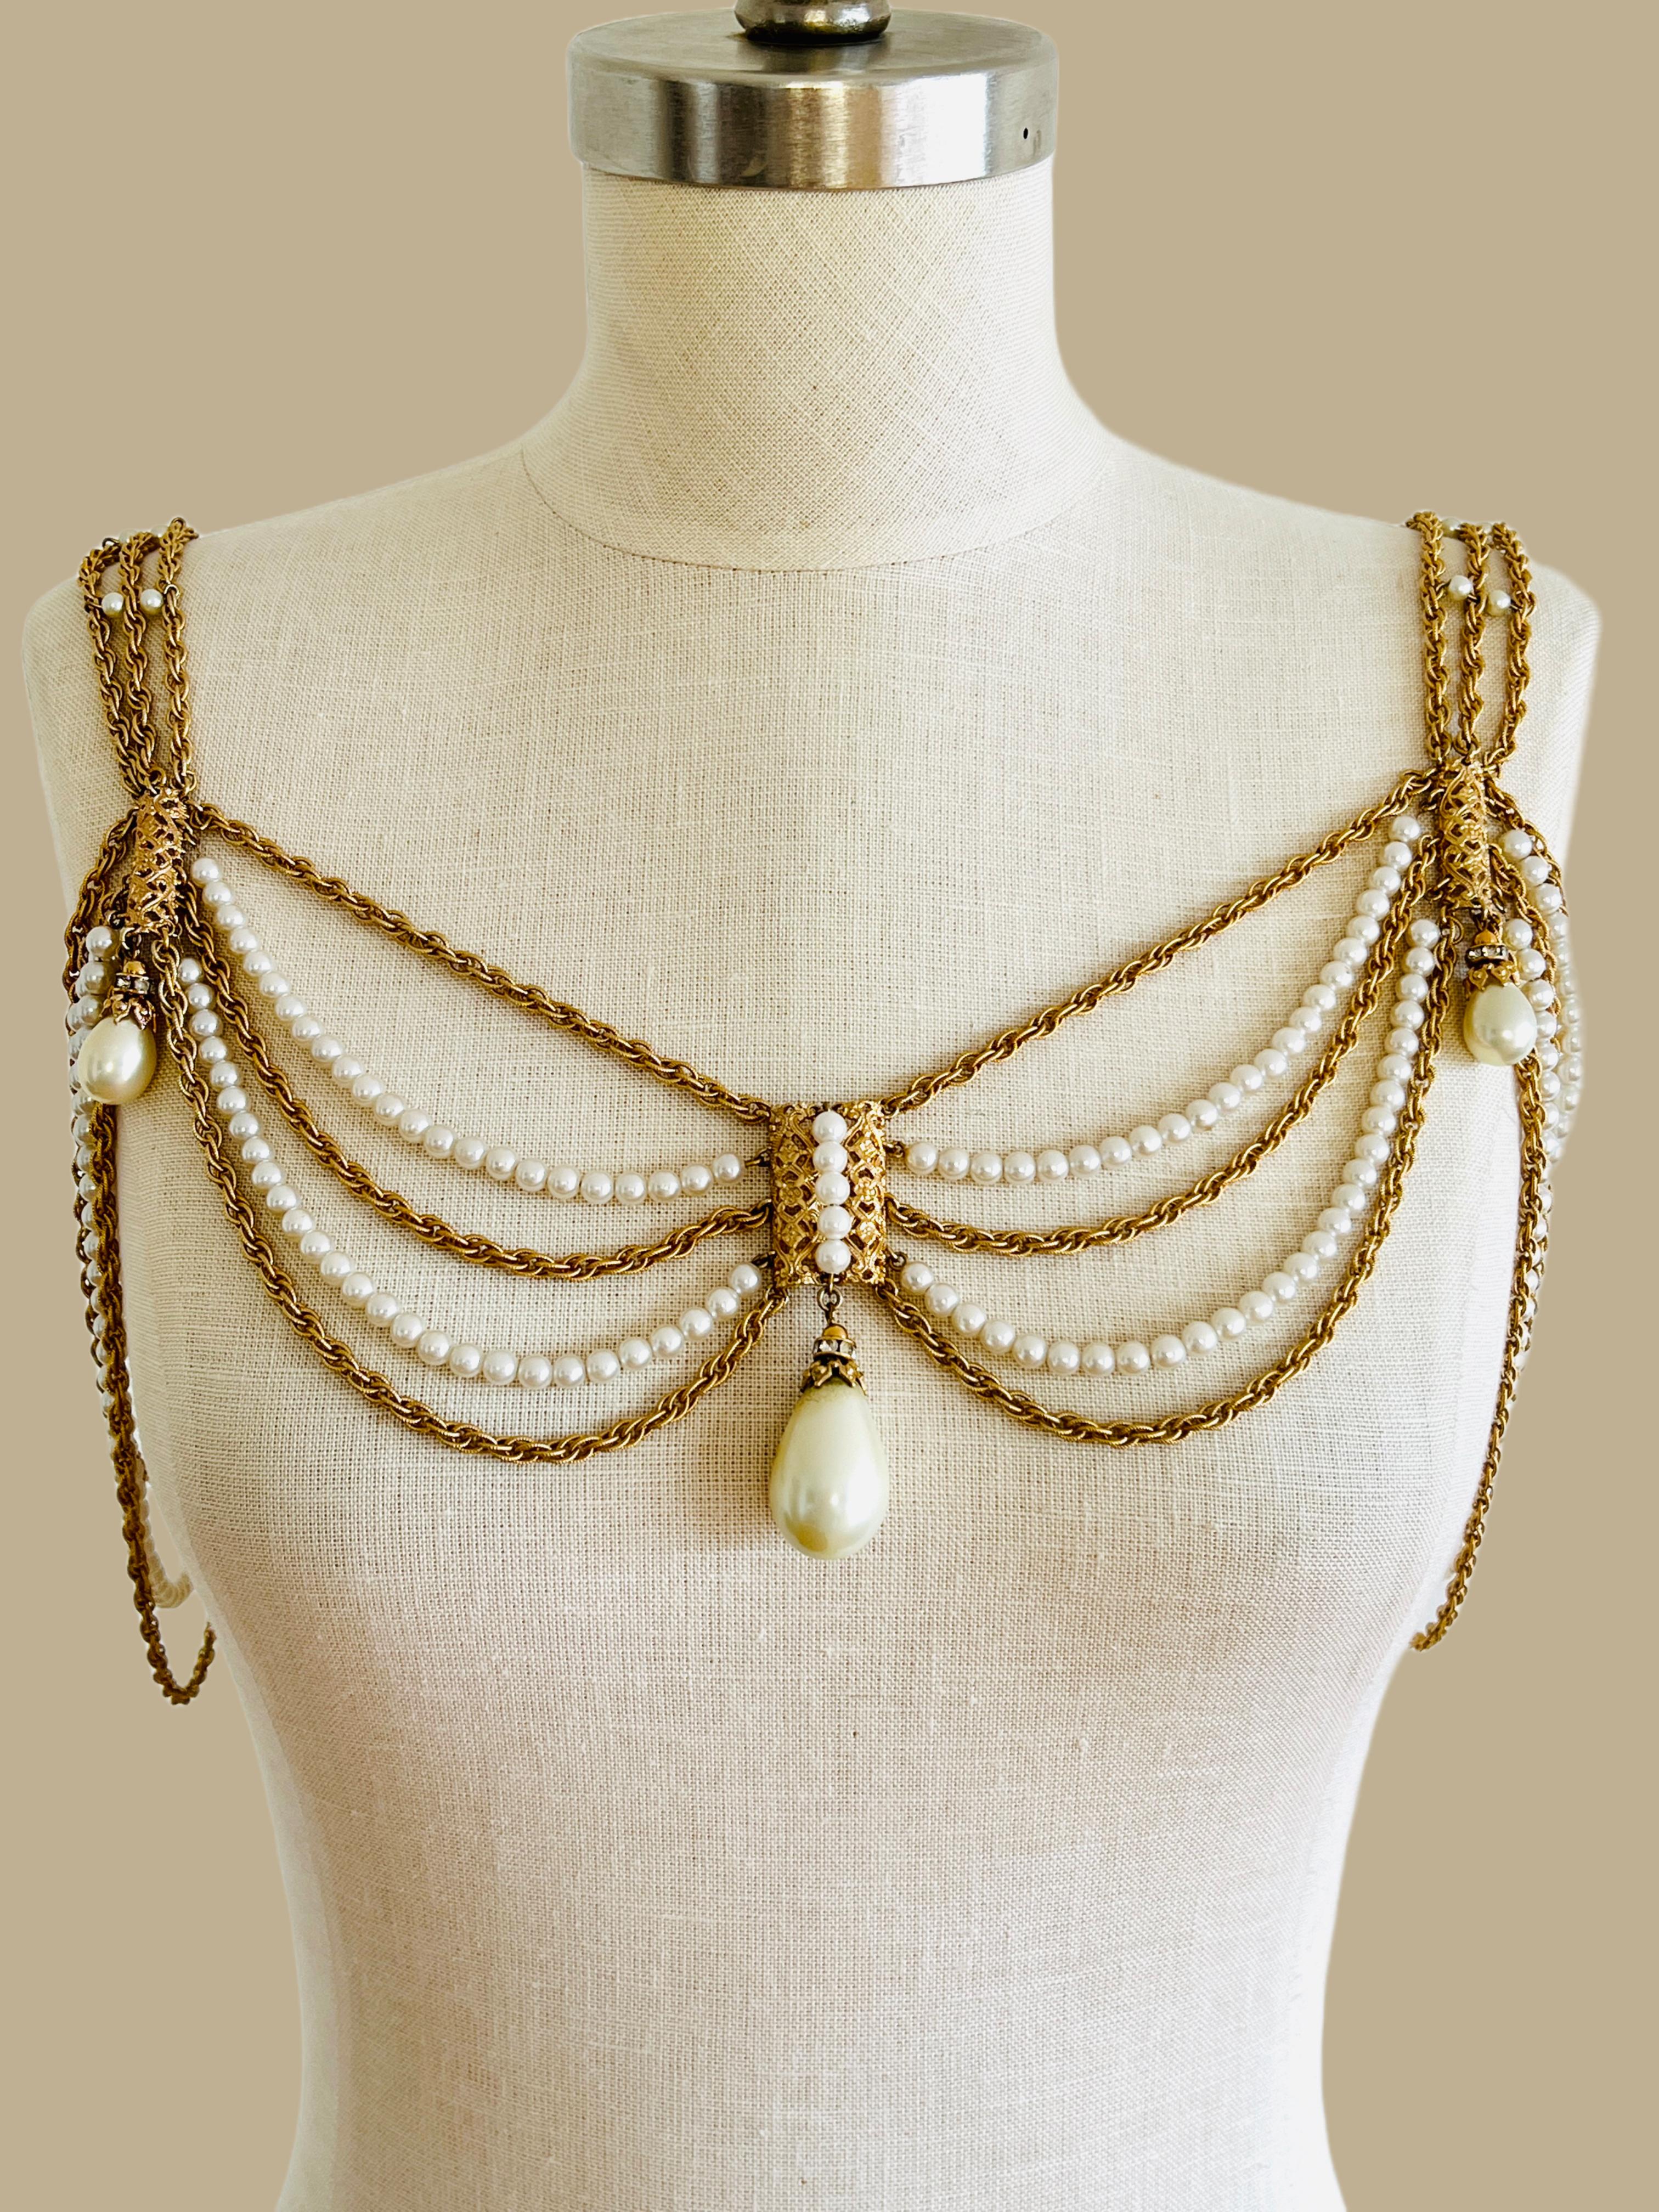 Napier Multi Chain Gold Tiered Layered Shoulder Necklace, Bikini Belt For Sale 3